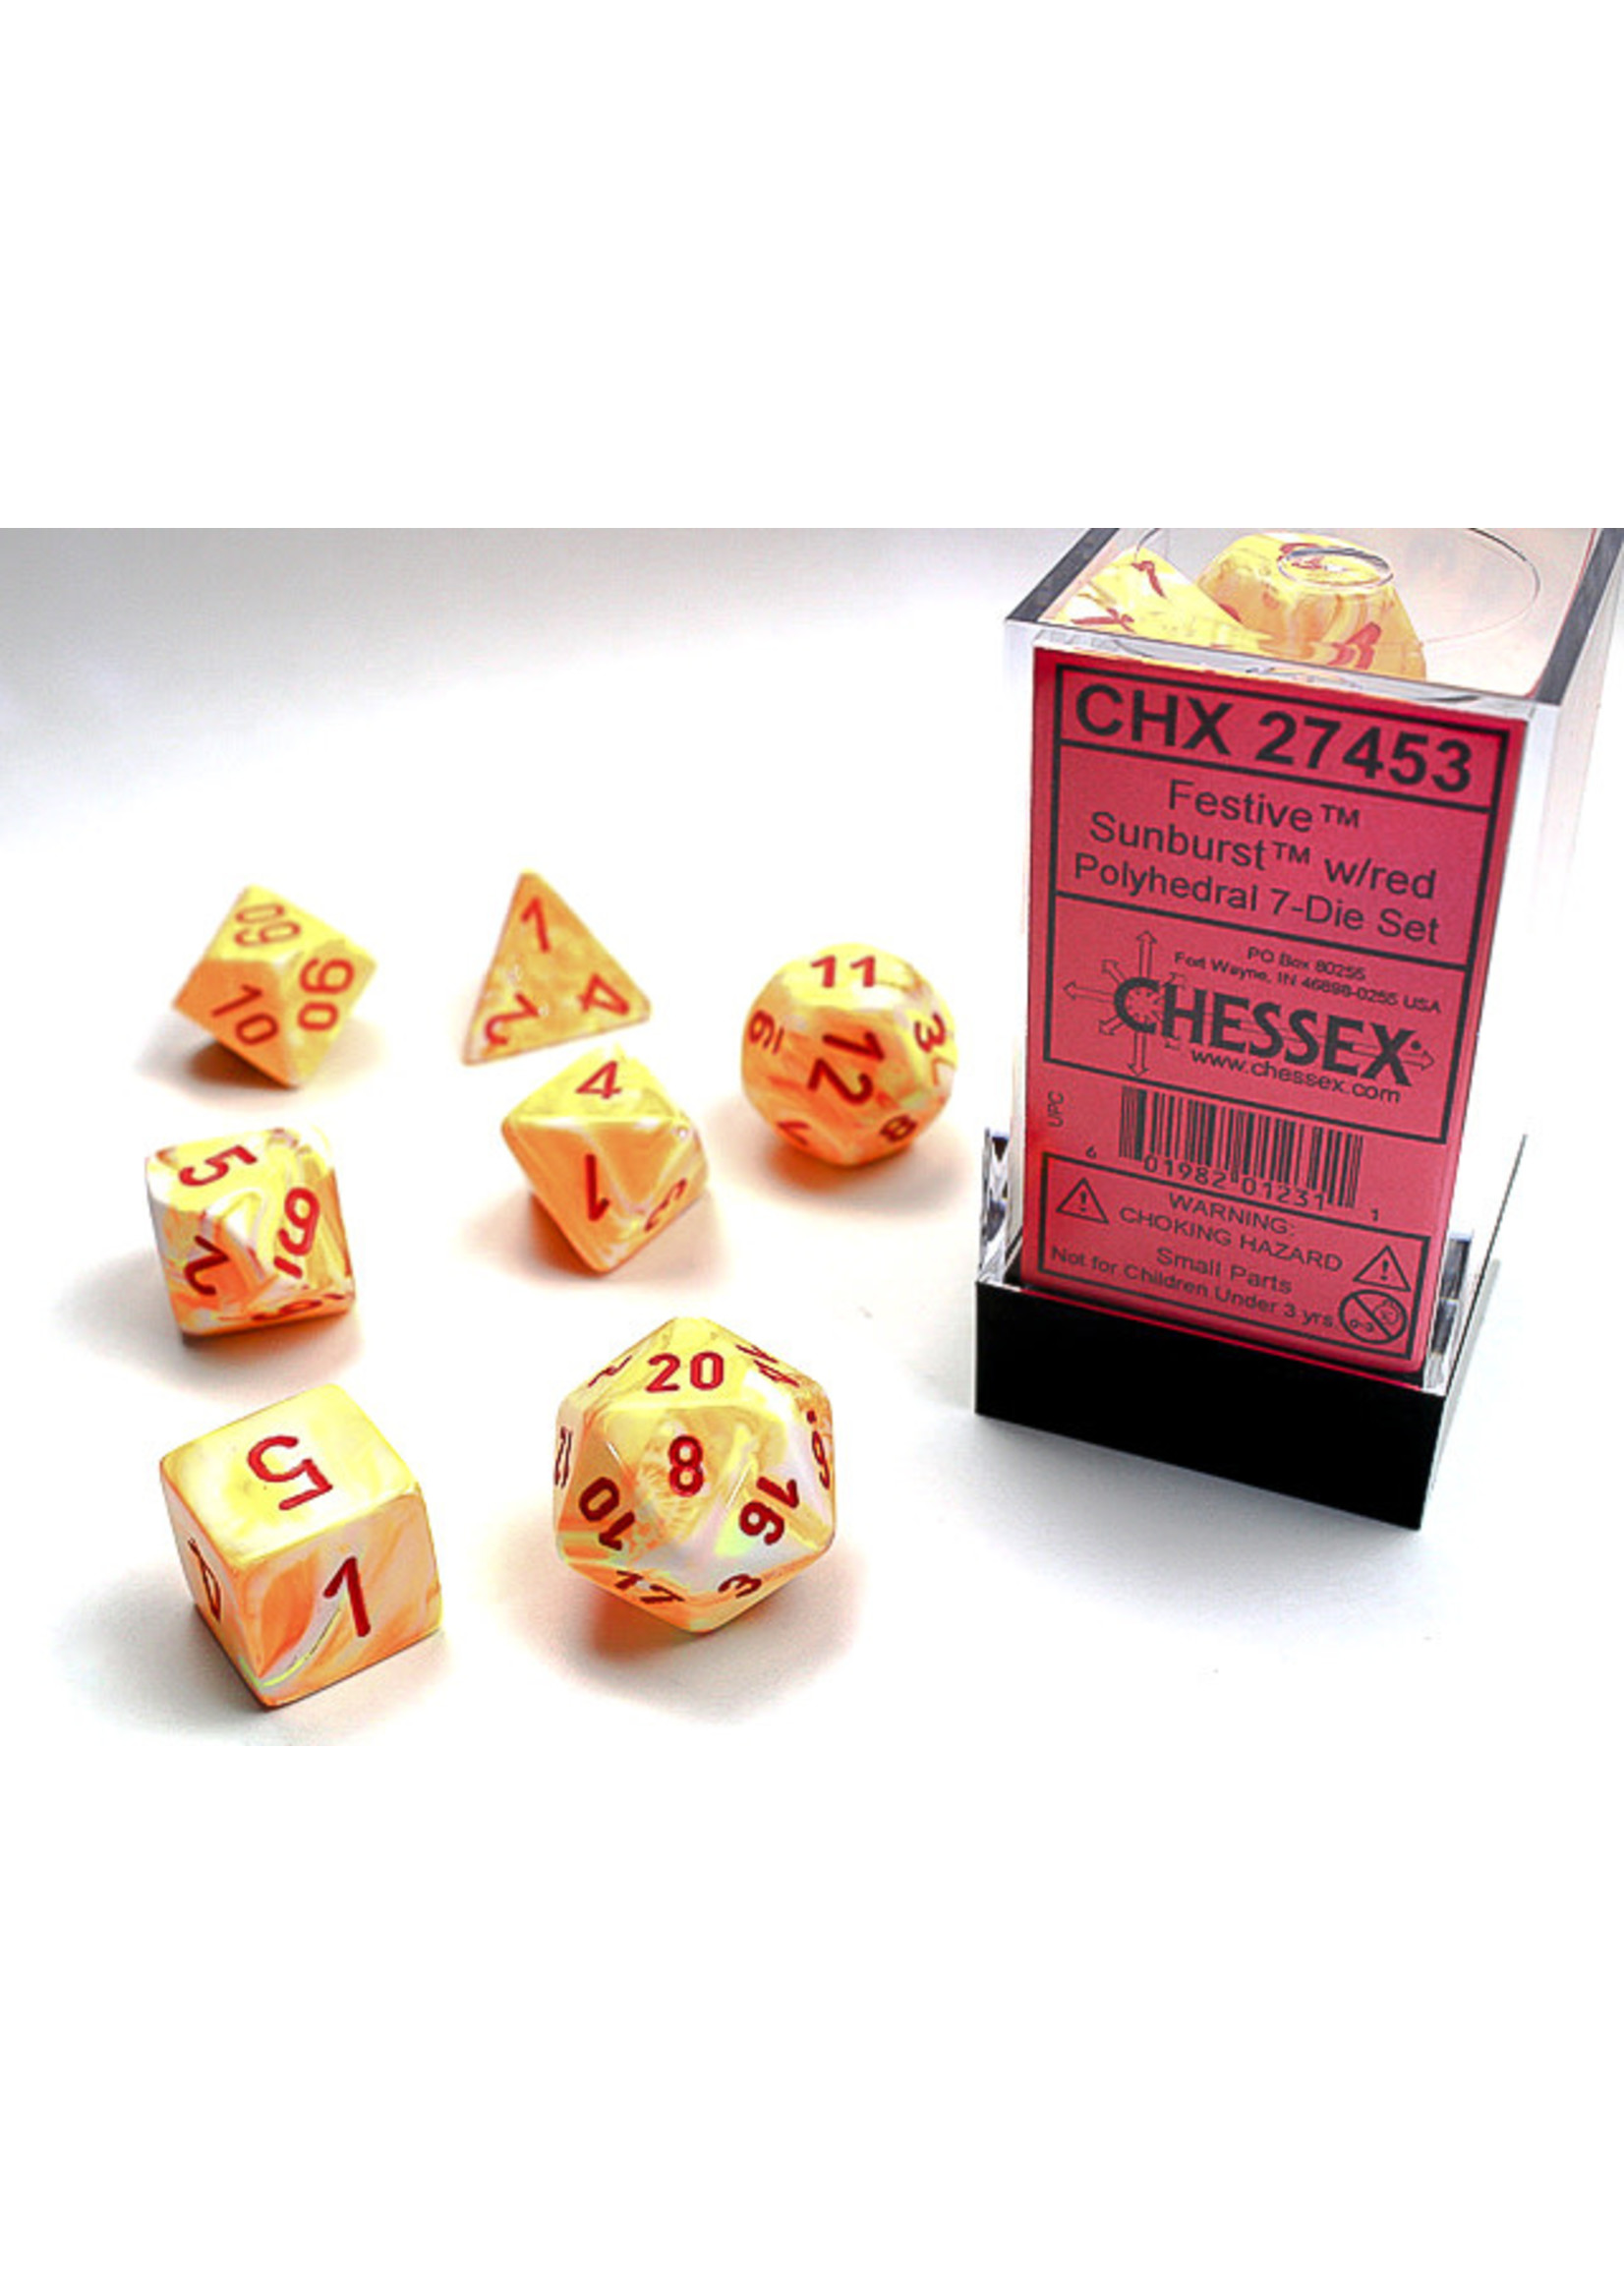 Chessex Festive Sunburst w/red: Set of 7 Polyhedral Dice by Chessex